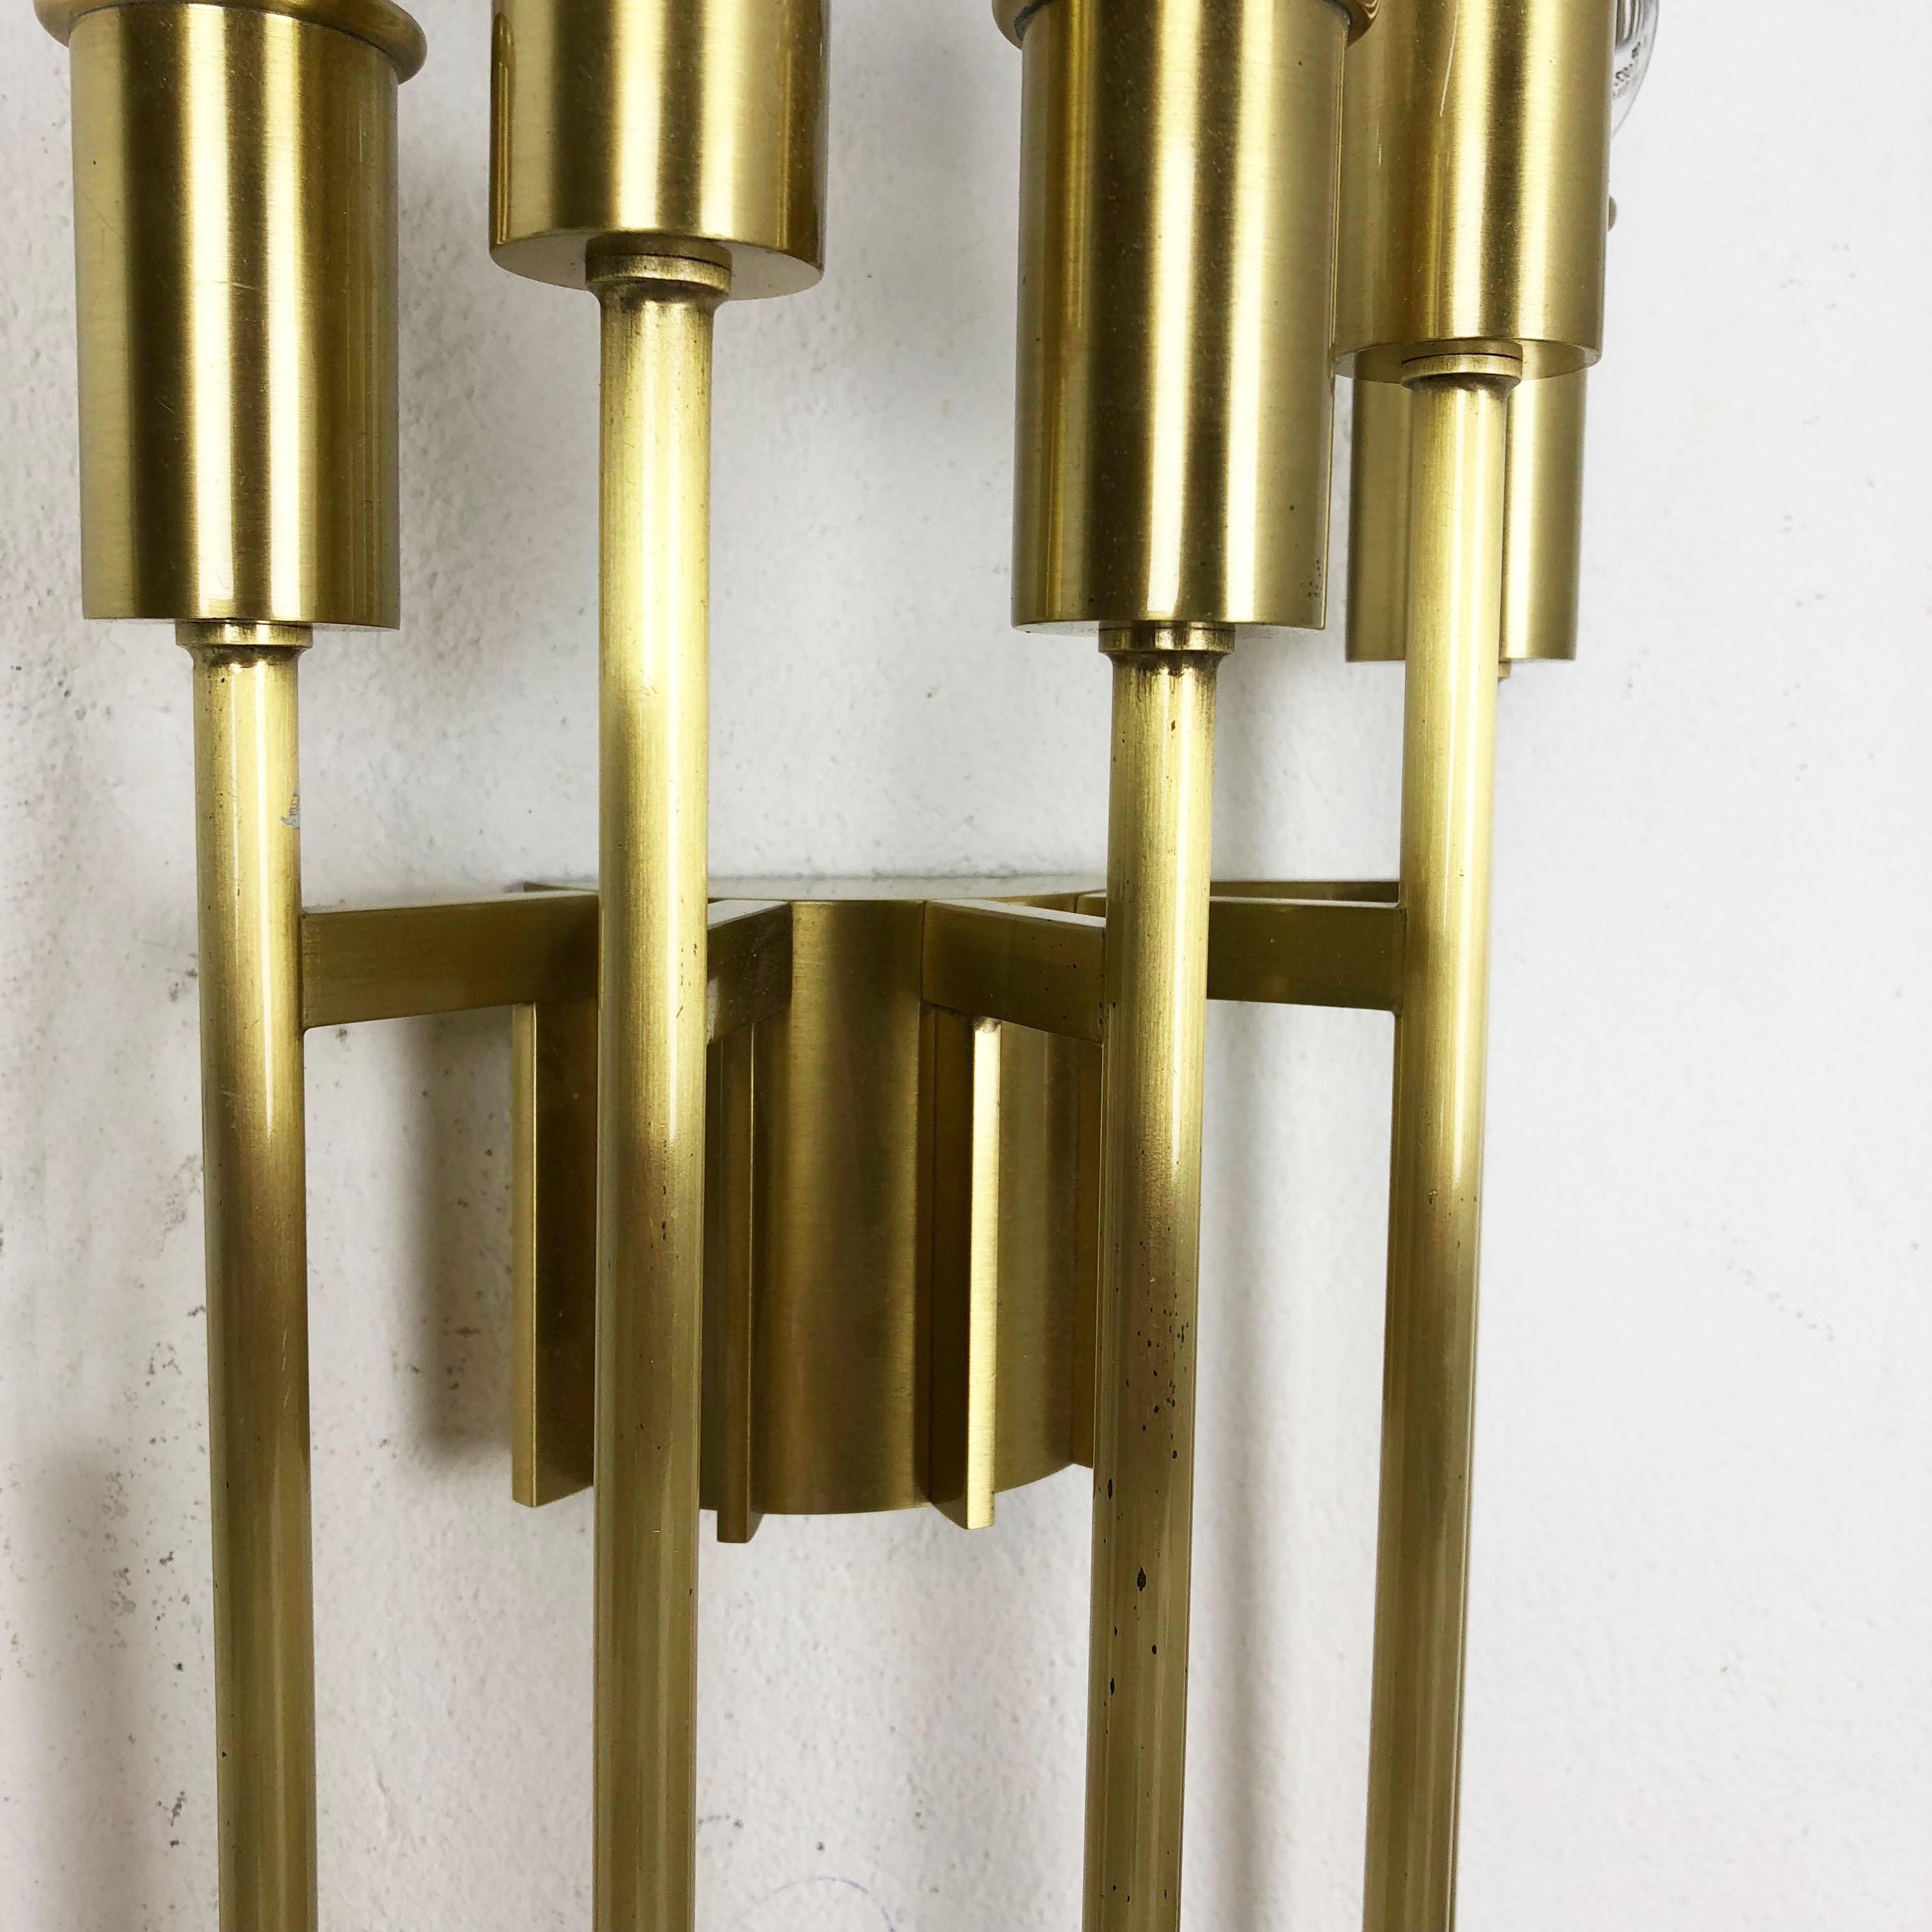 Brass Italian Stilnovo Style Theatre Wall Ceiling Light Sconces, Italy, 1970s For Sale 3